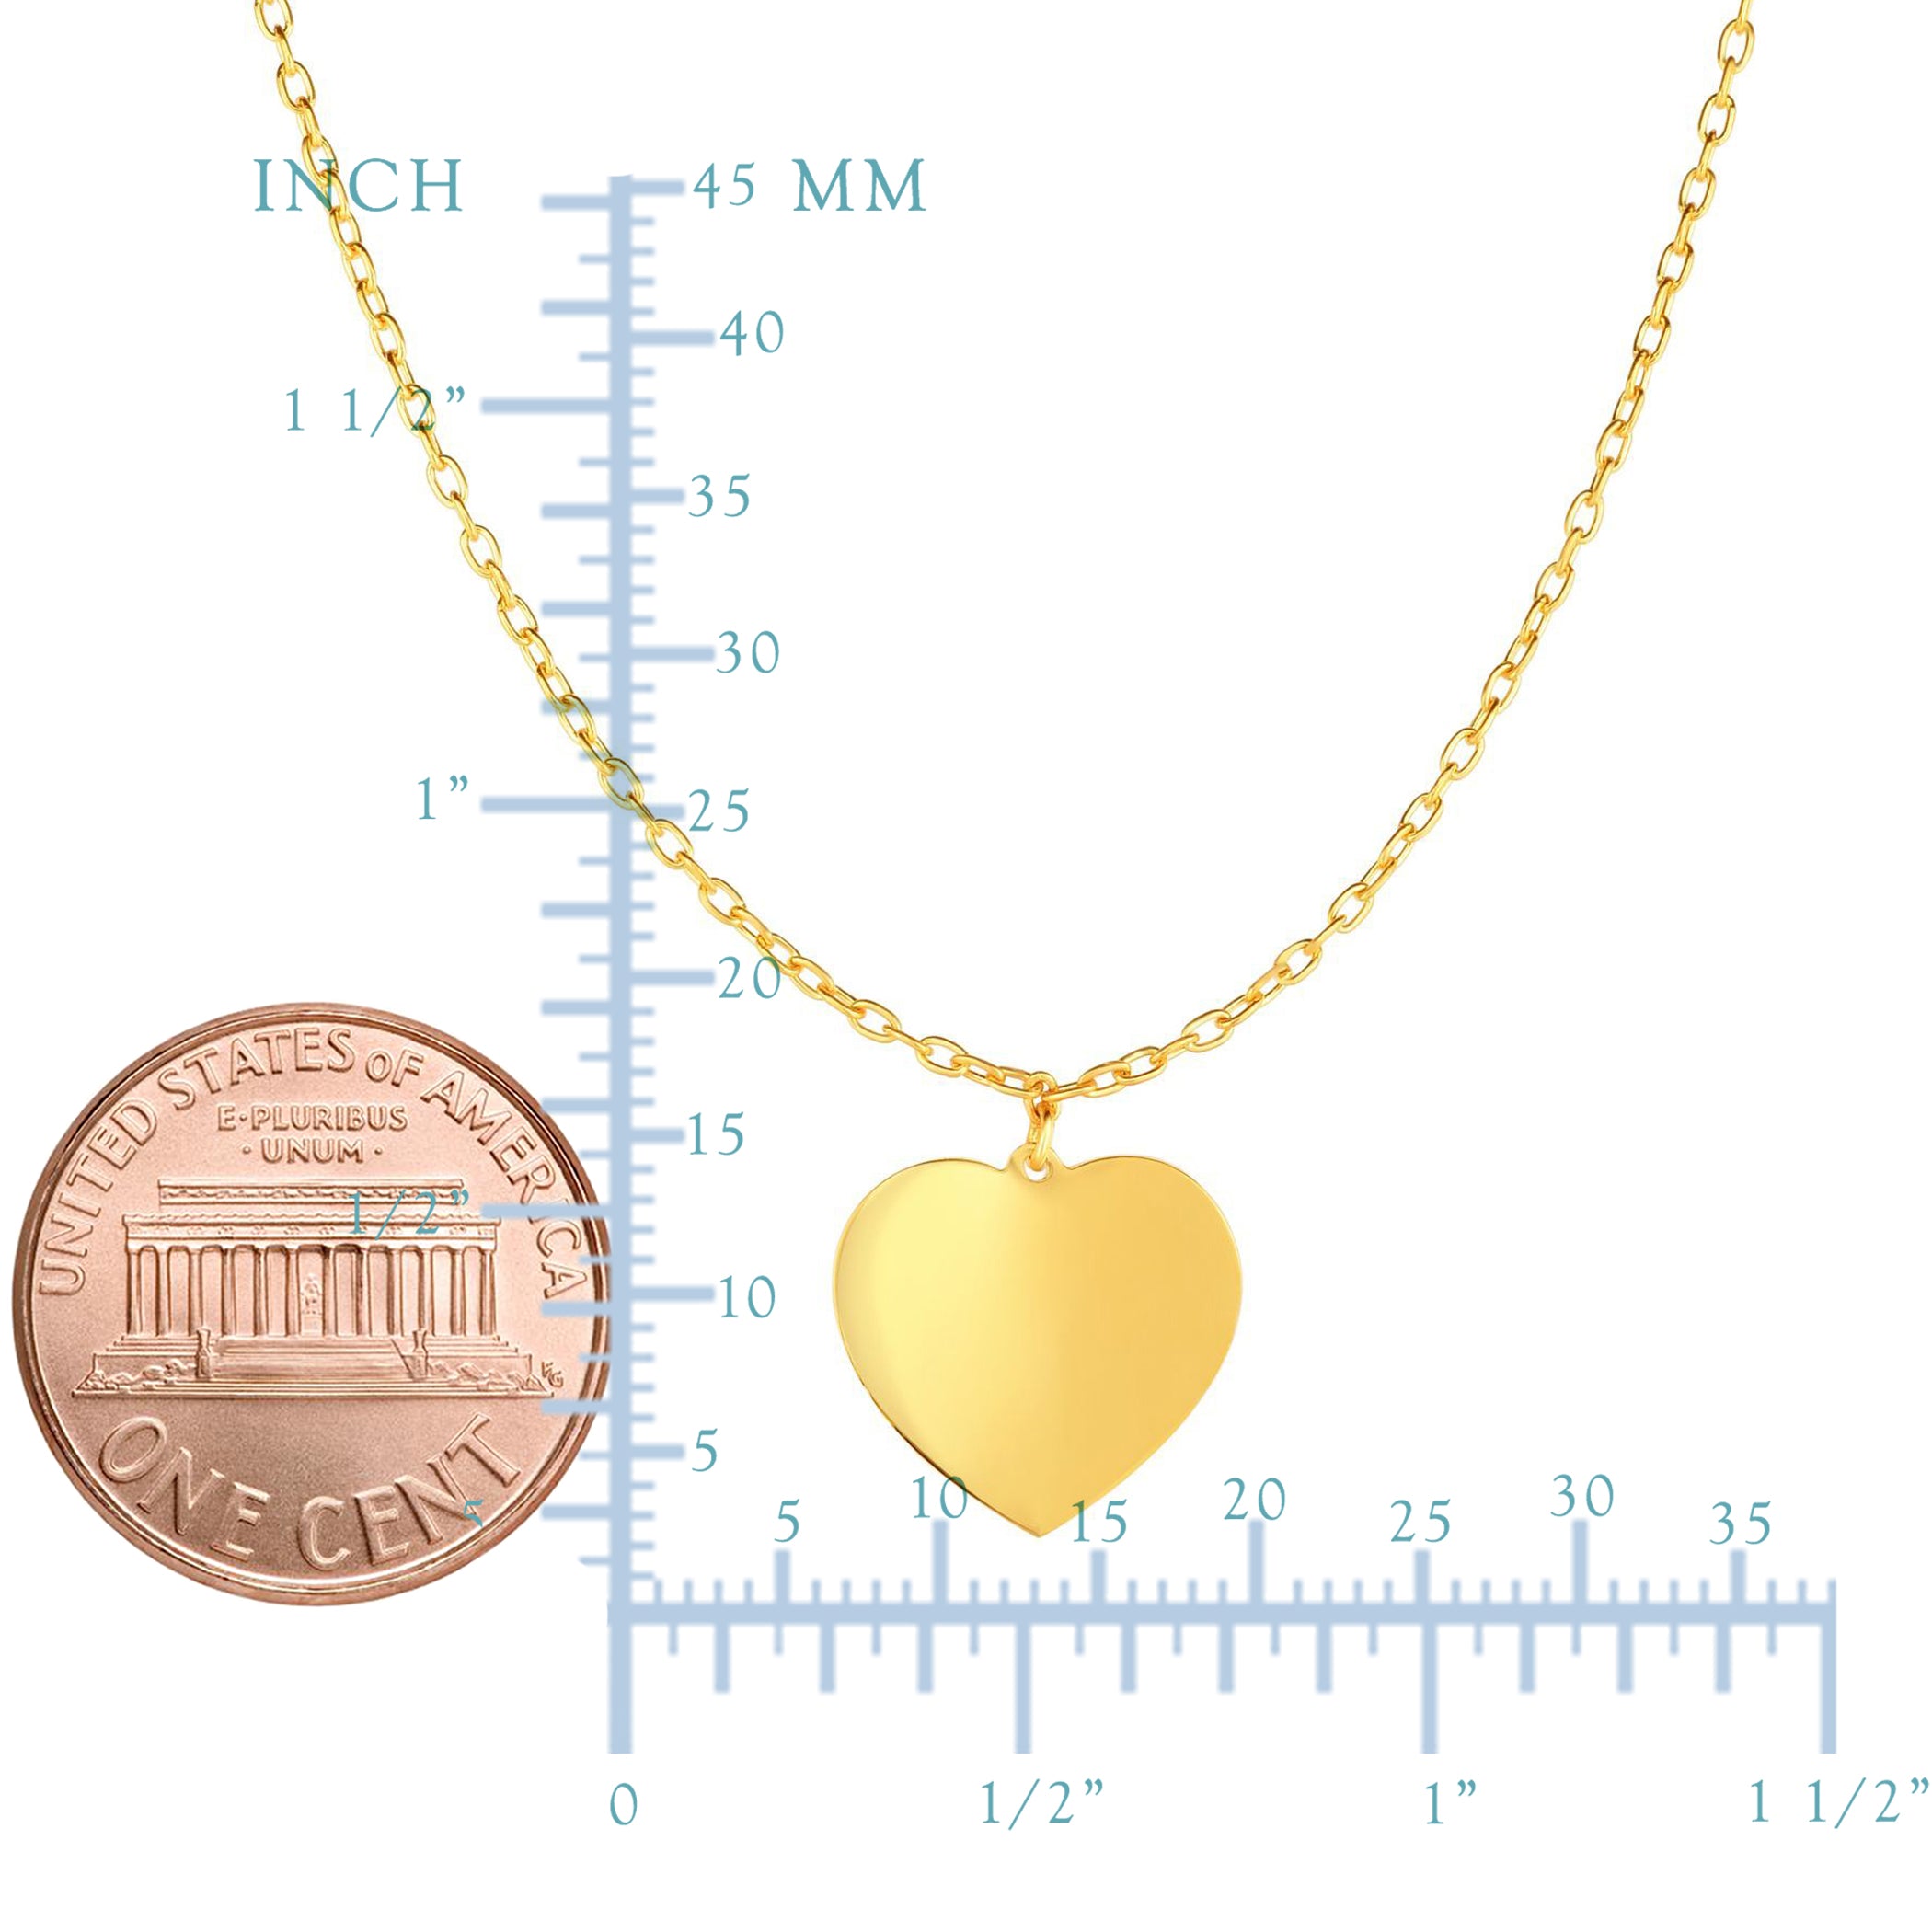 14k Yellow Gold High Polished Heart Necklace,16" fine designer jewelry for men and women